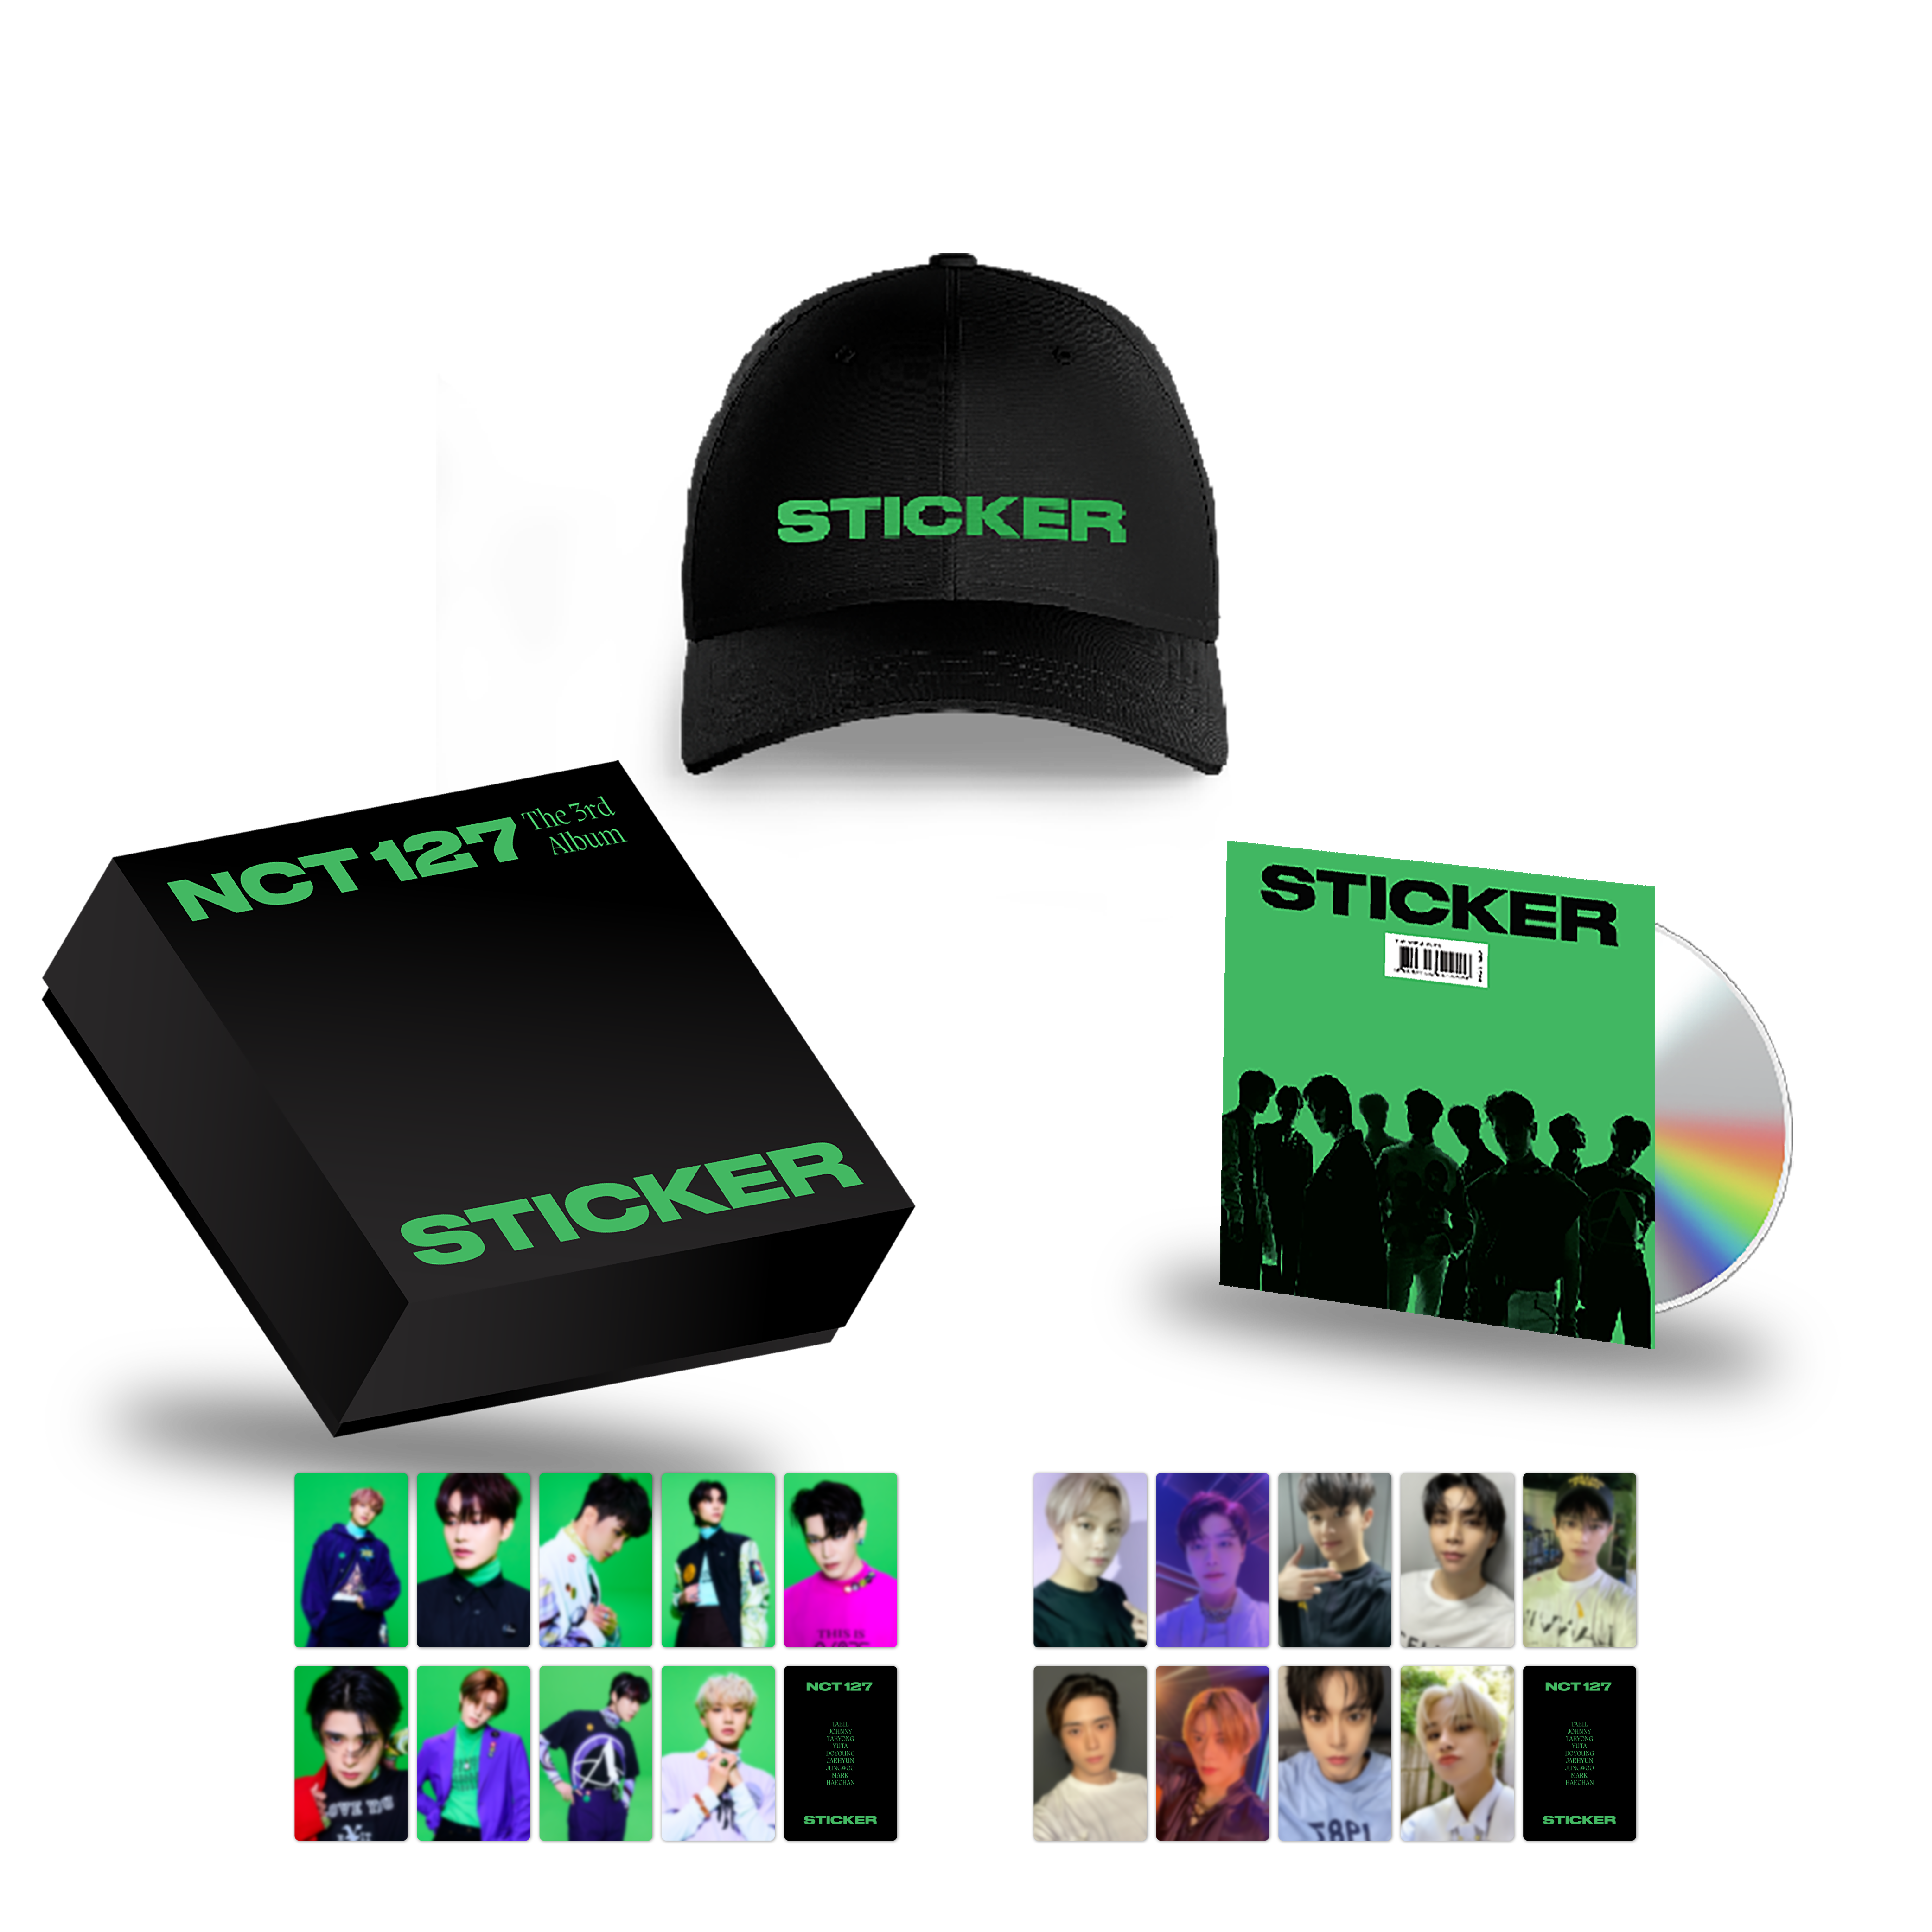 nct127 sticker deluxe box トレカ ジェヒョン